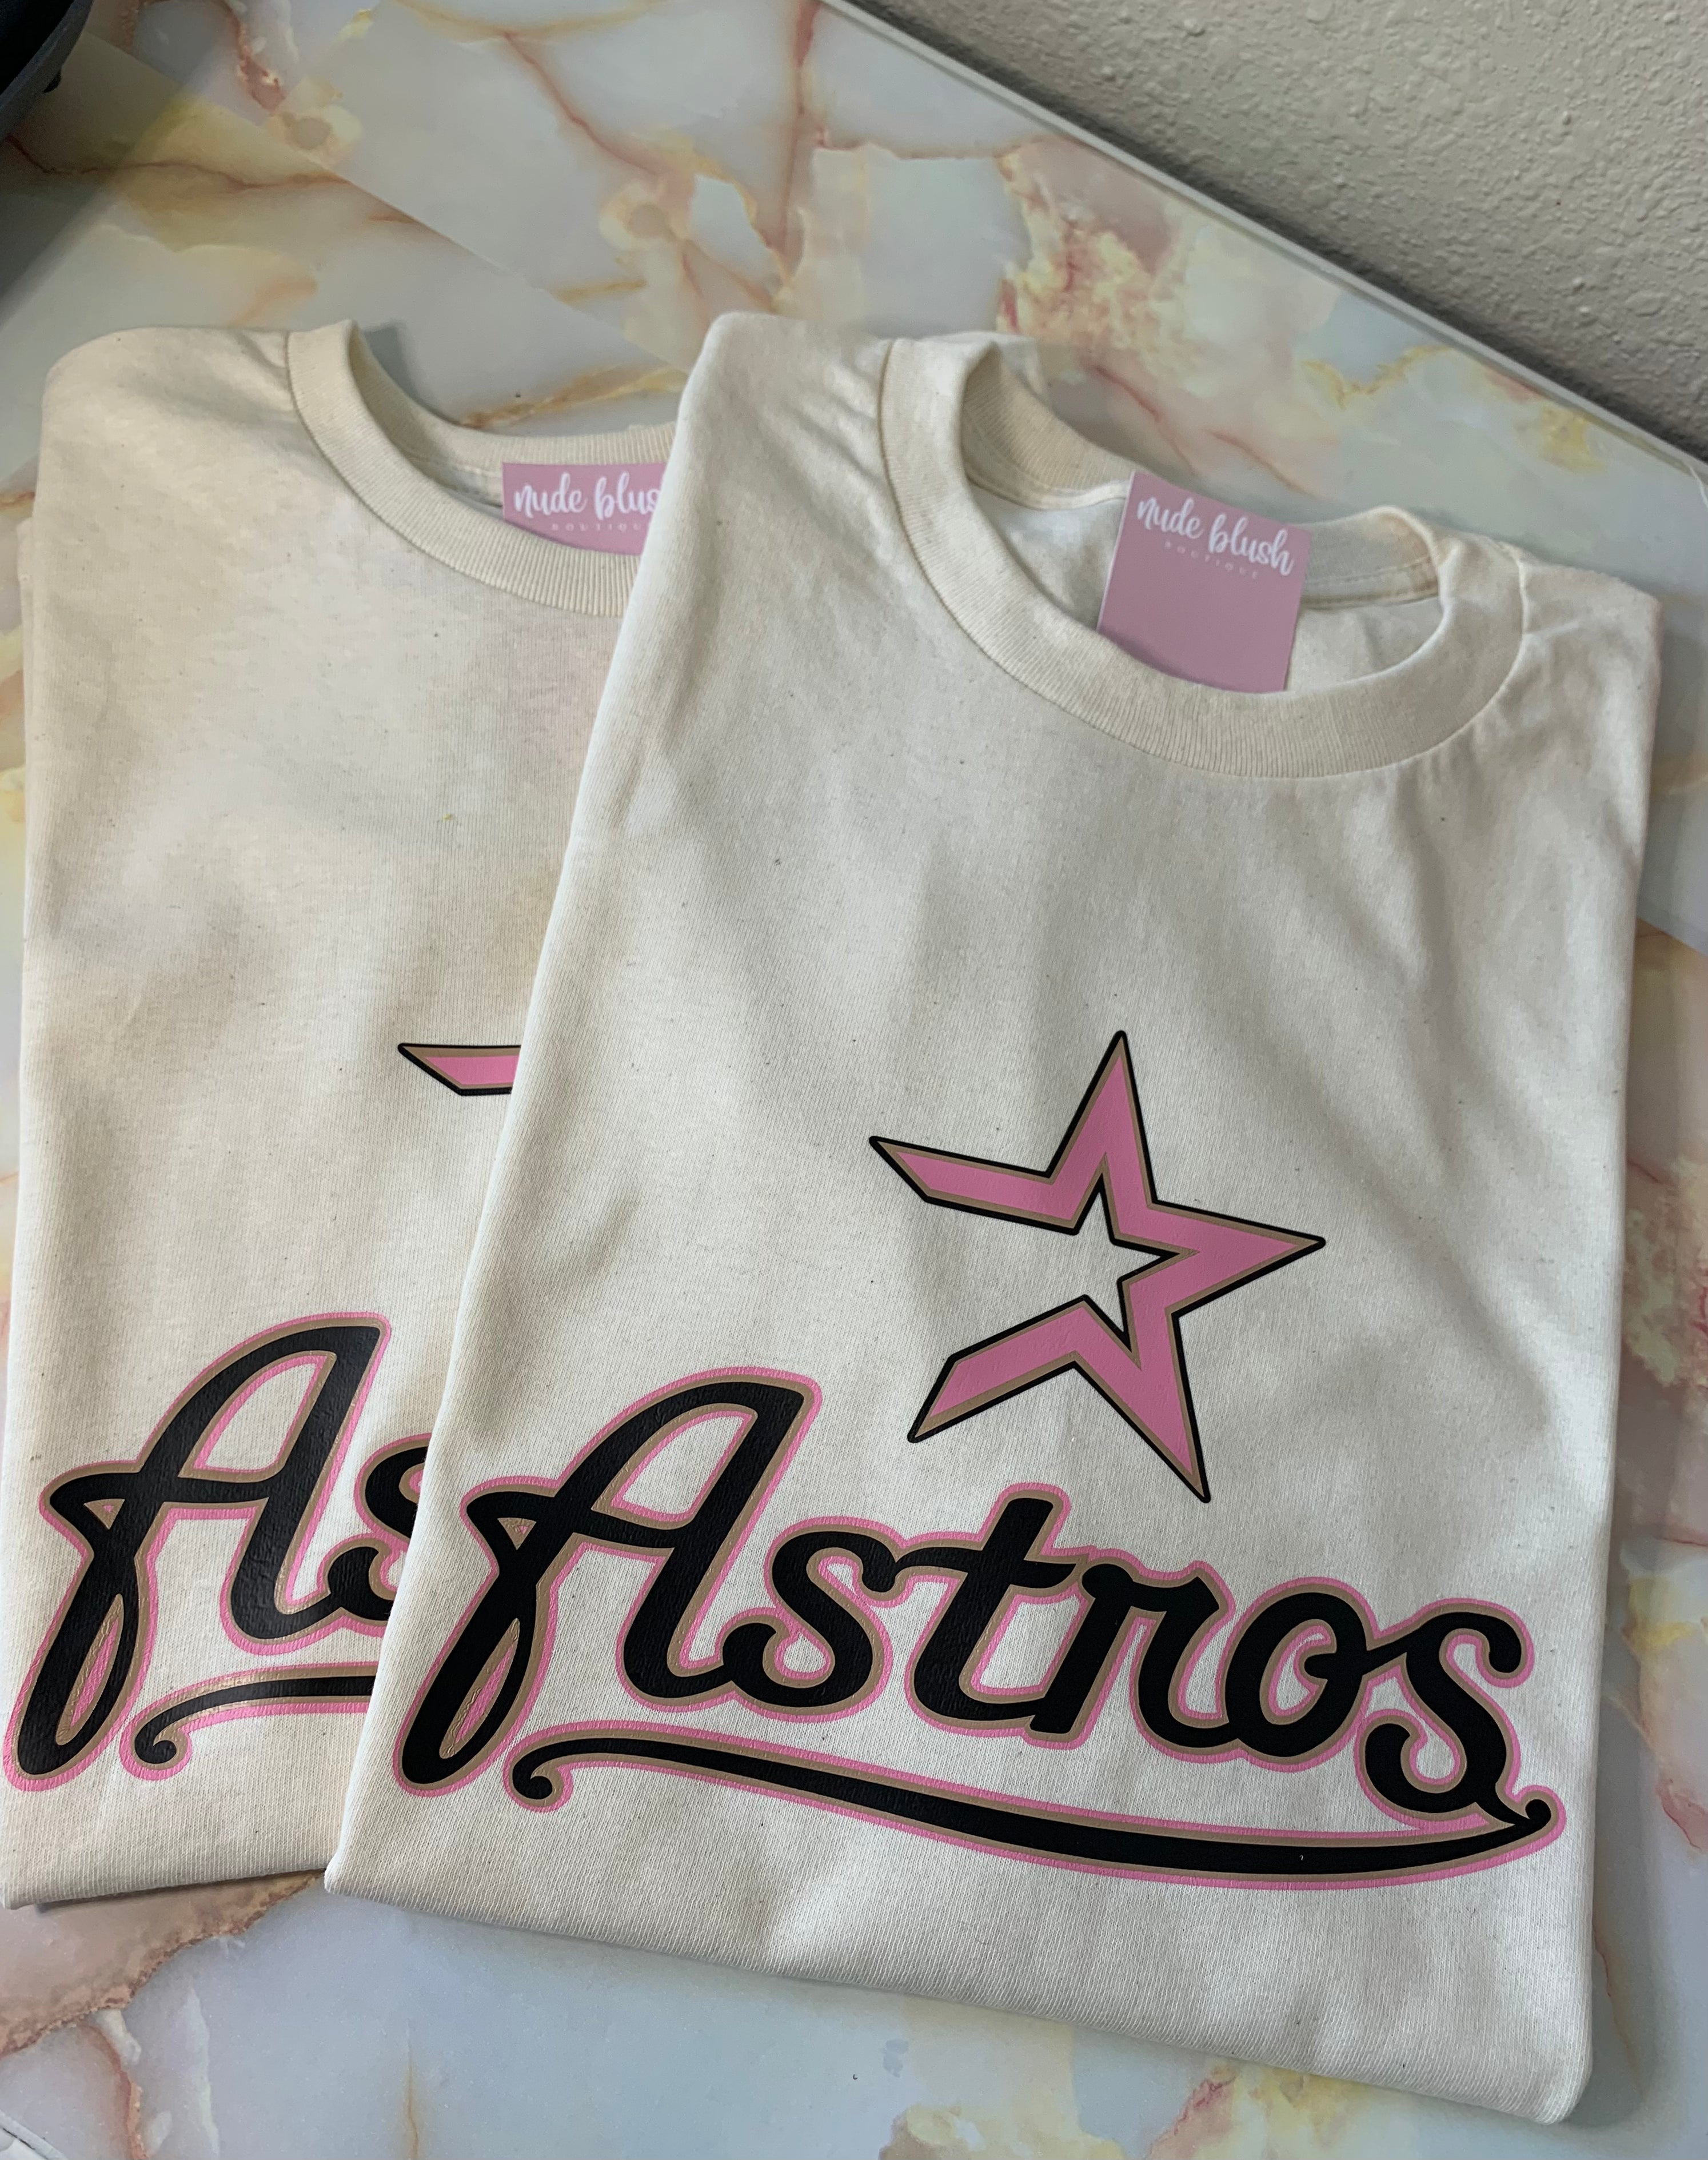 Blush Apparel Boutique Astros Orbit Youth Large